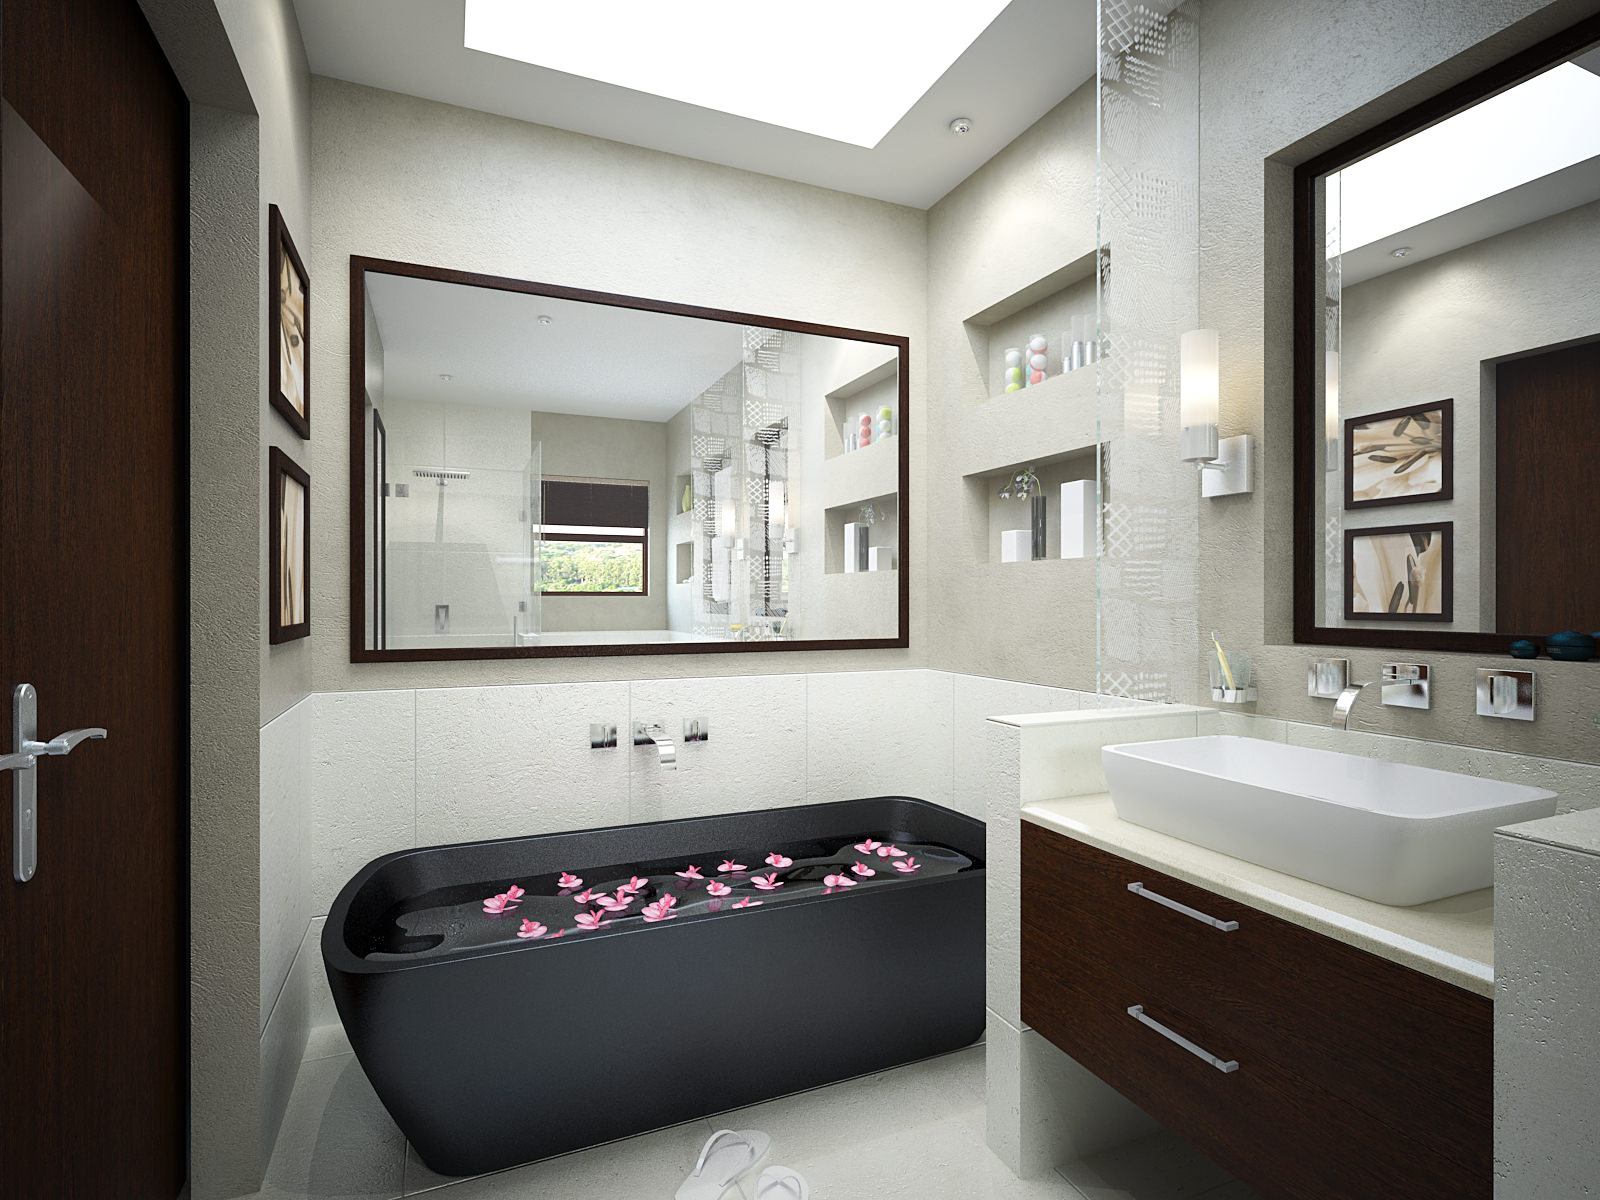 Small Bathroom Black Glamorous Small Bathroom Remodel With Black Bathtub Furnished By Double Handle Faucet And Large Mirrors Completed With Vanity Sink Drawers Bathroom Comfortable Small Bathroom Ideas For Washing In Charming Style